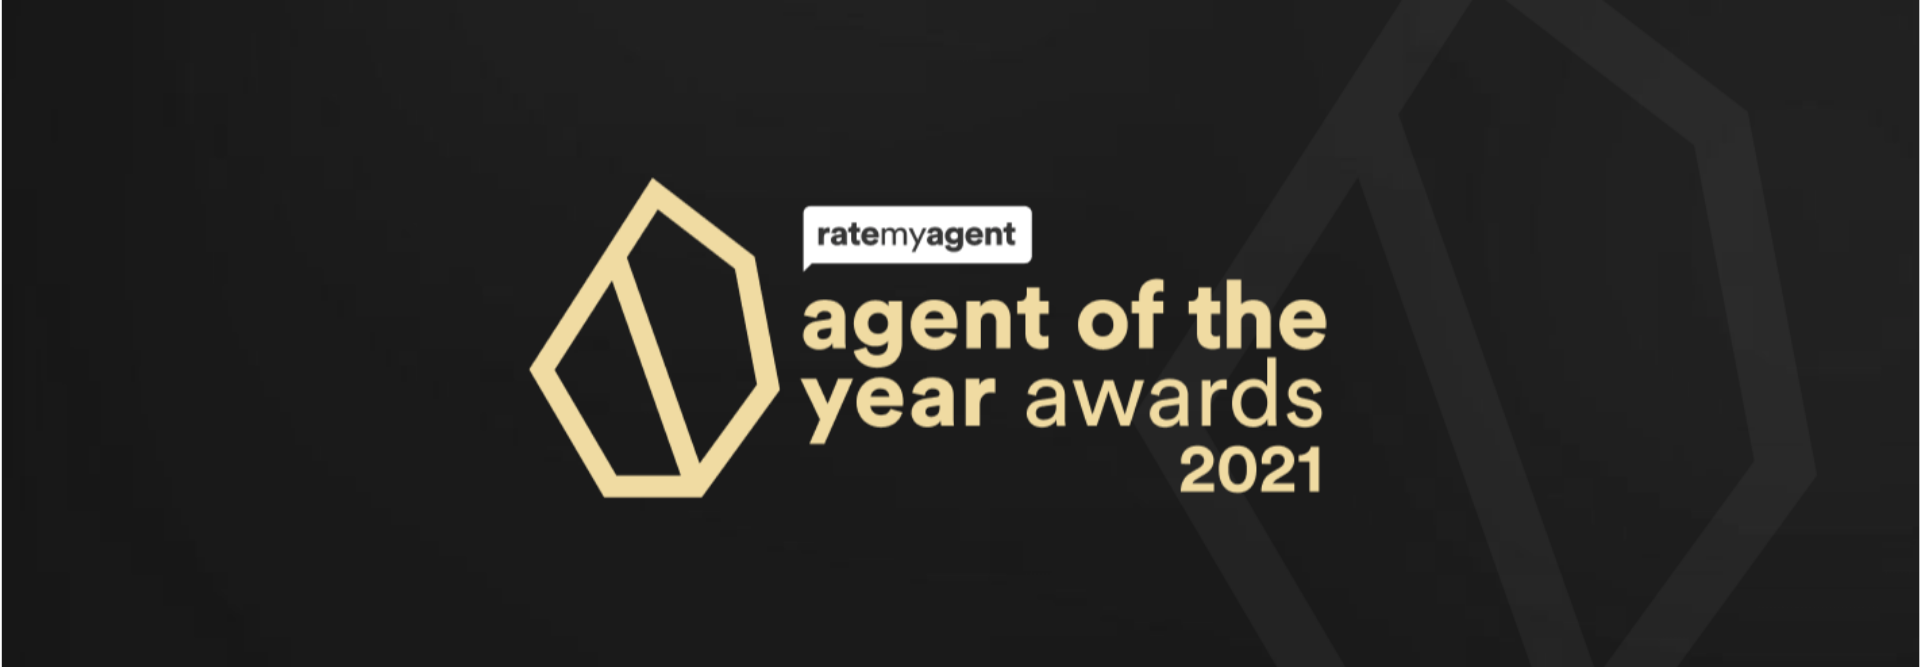 RateMyAgent Officially Announces the 2021 Agent of the Year Awards!